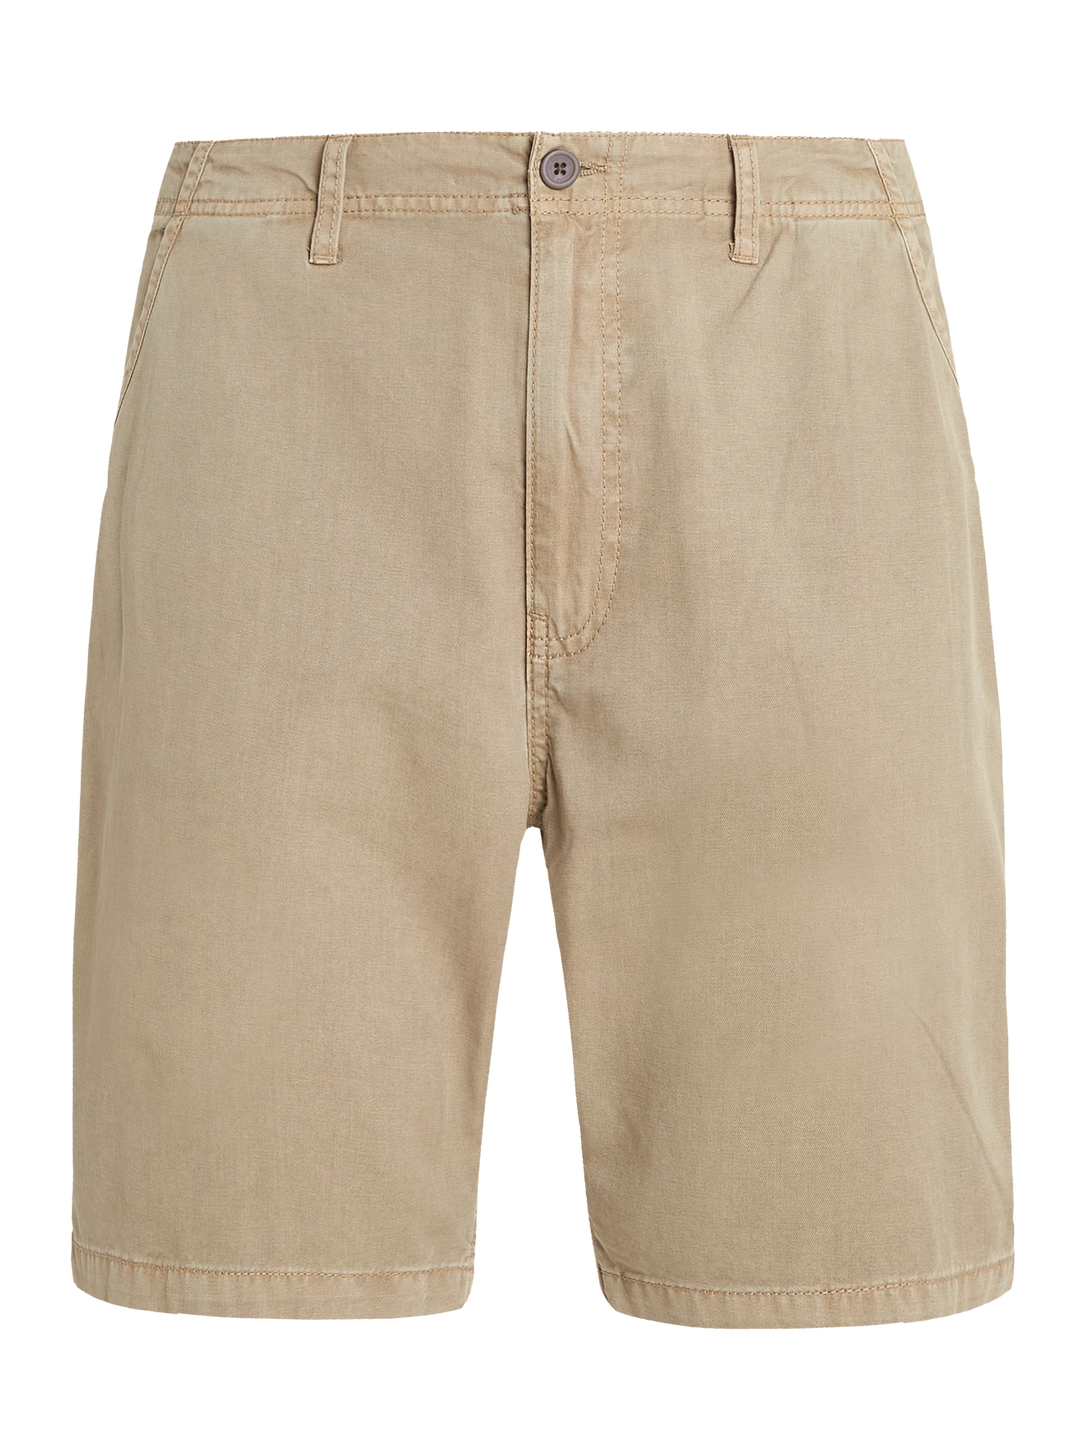 Protest PRTCOMIE Men's Shorts - Bamboo Beige